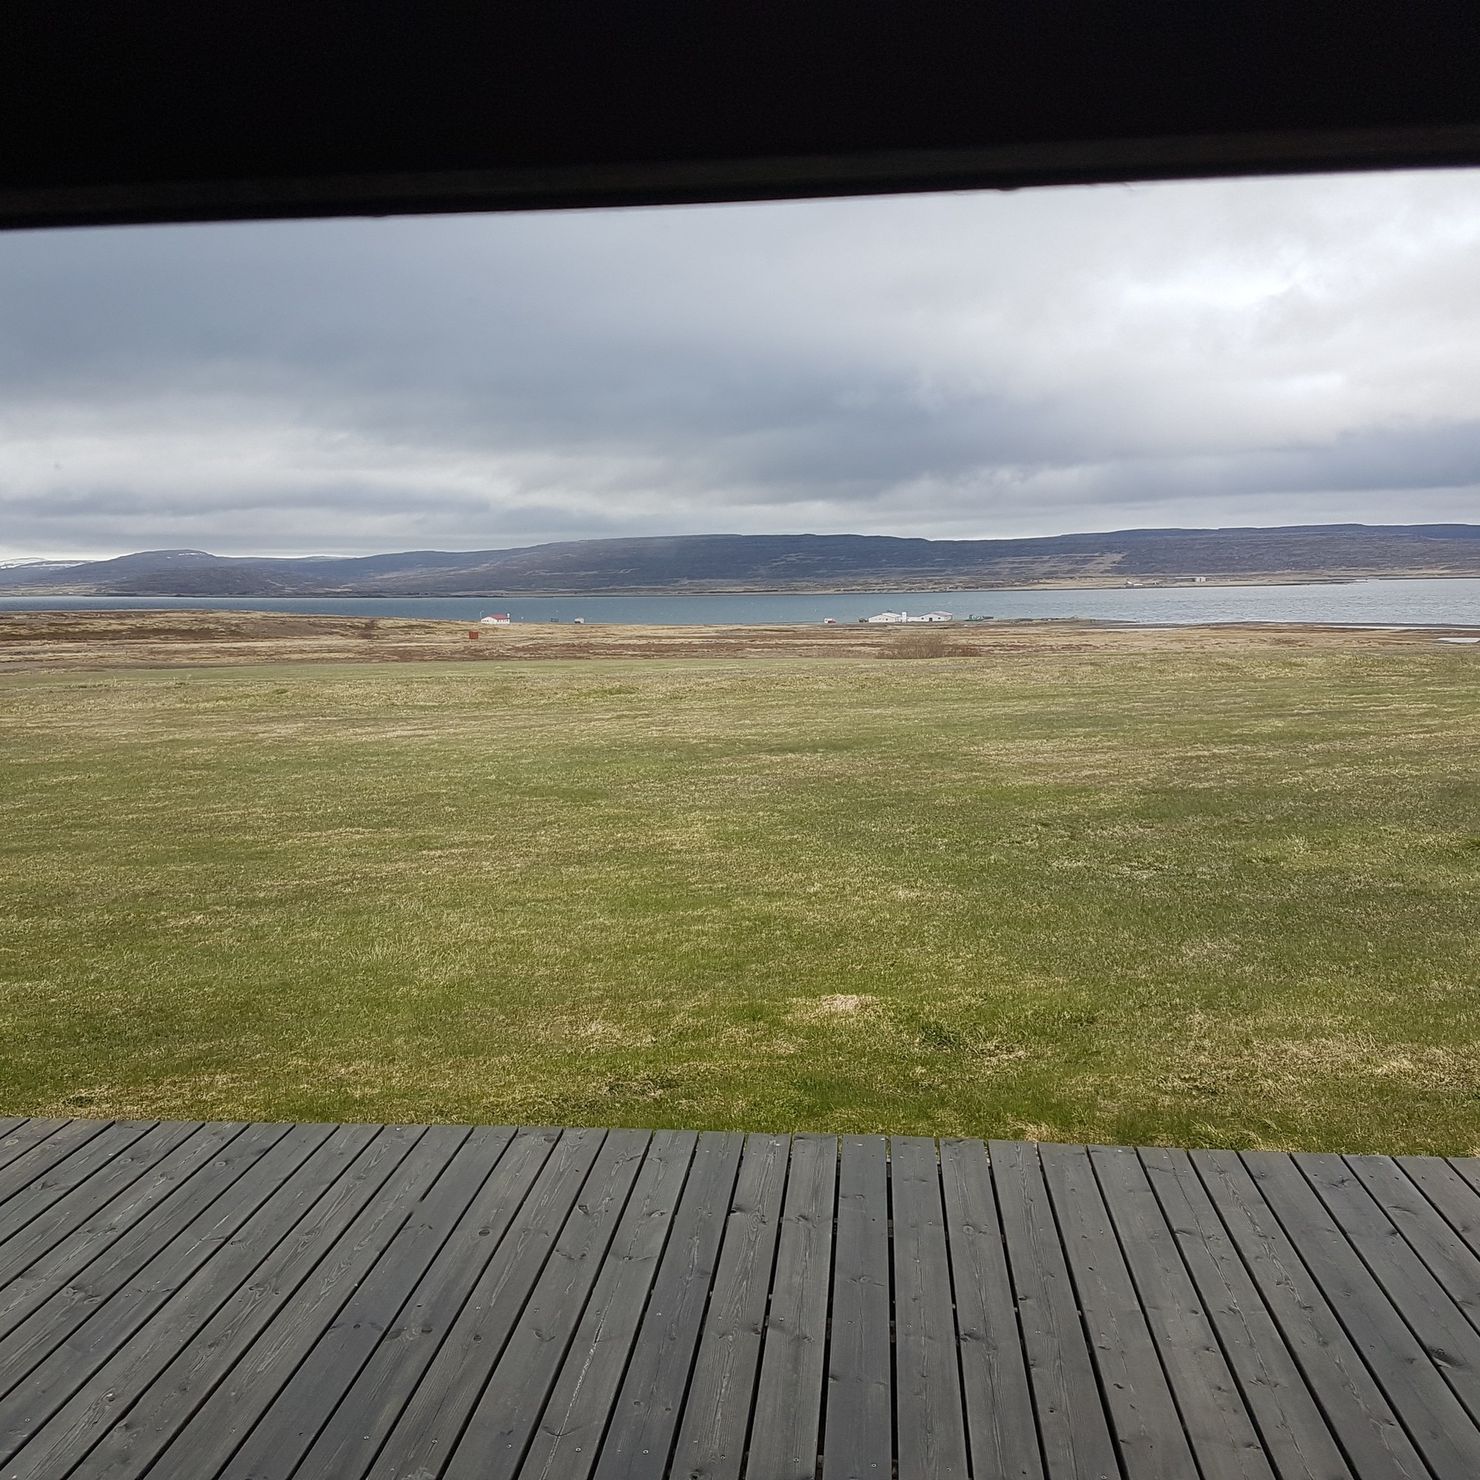 View from the terrace into the vastness of the Icelandic landscape